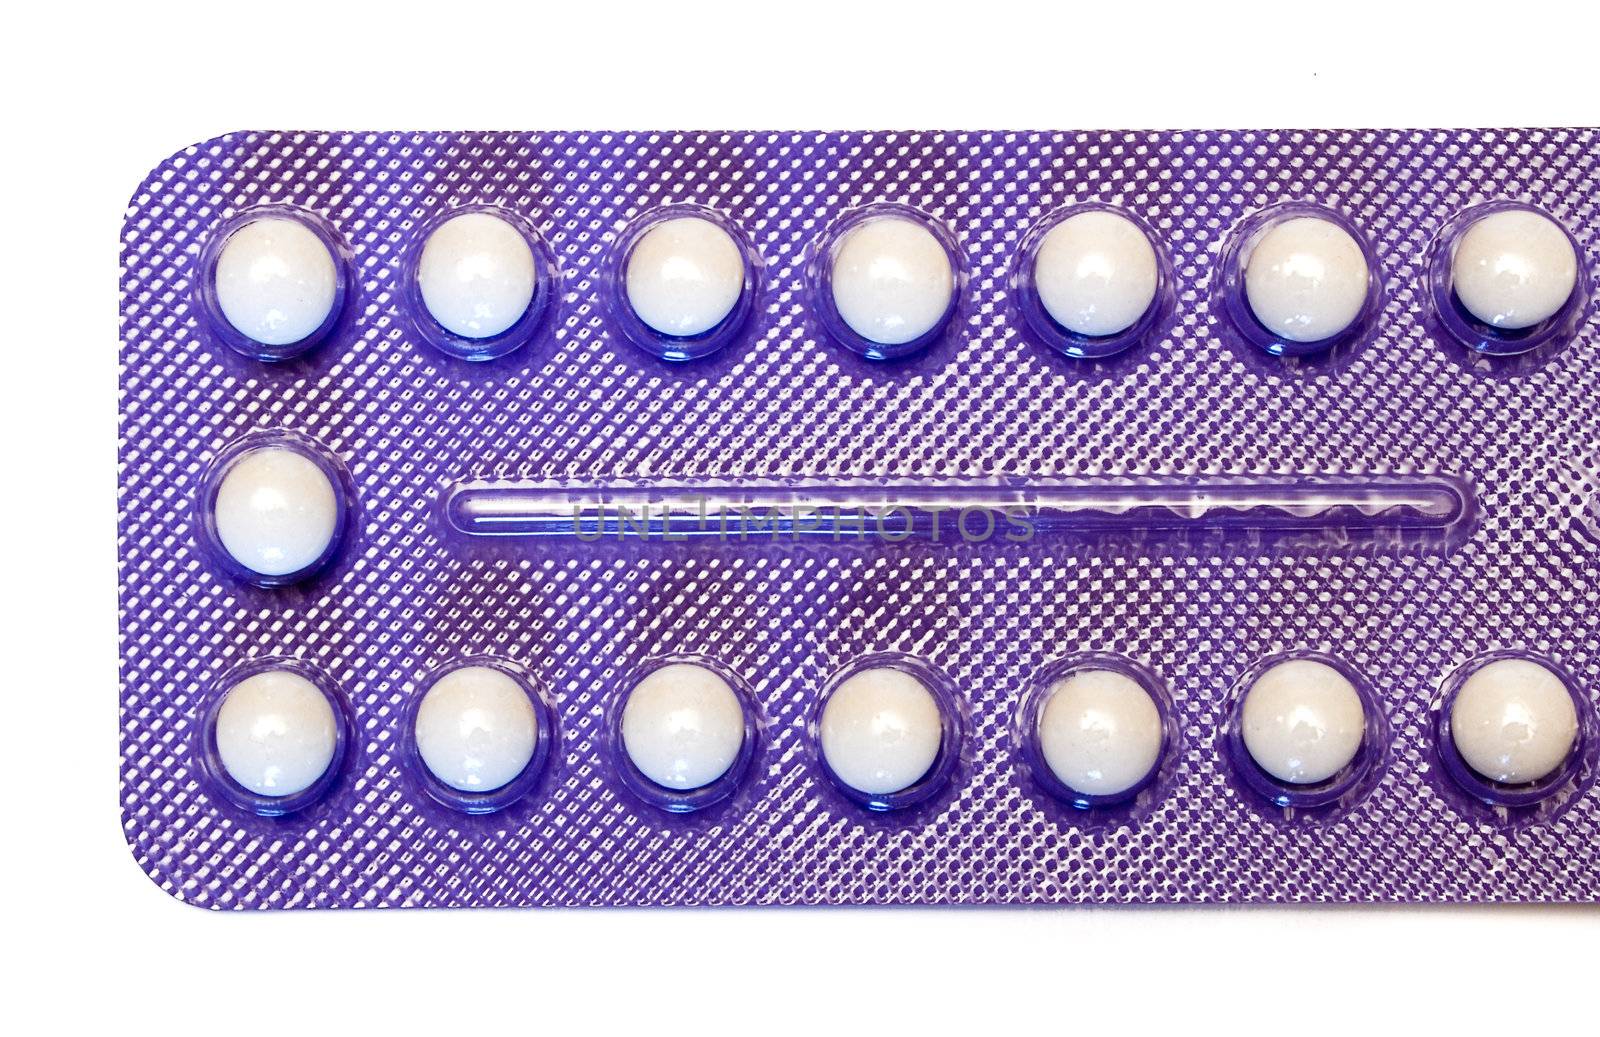 Blister pack of birth control pills. Isolated on a white background.